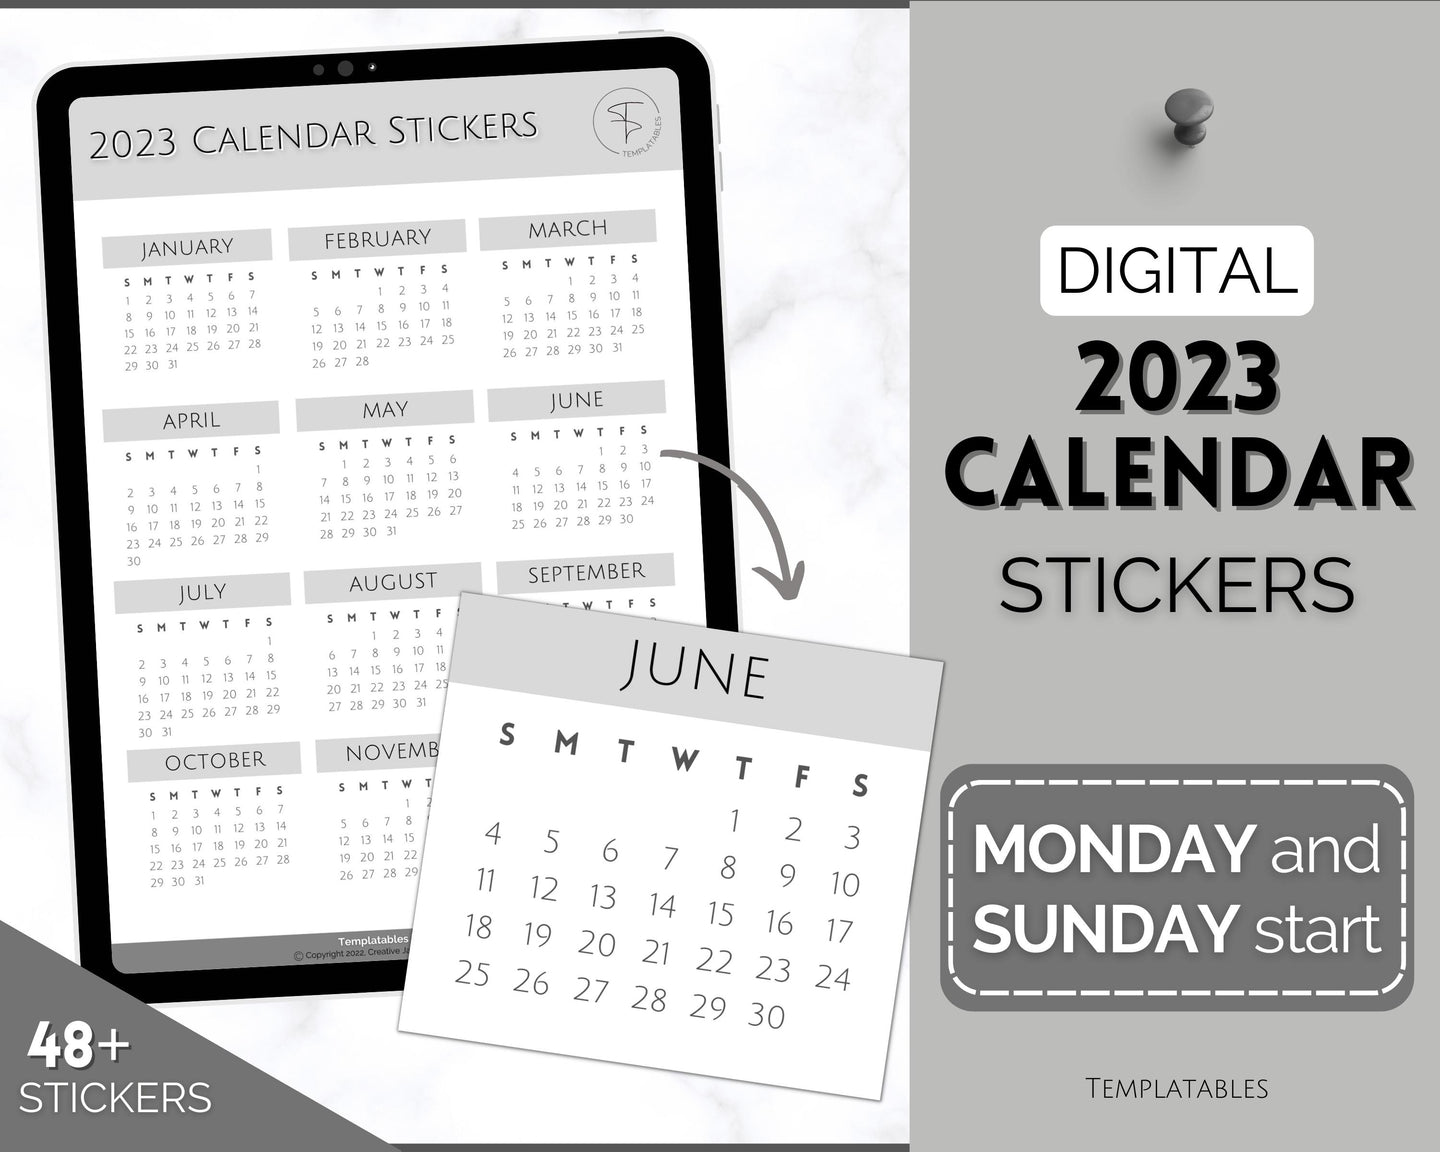 2023 Digital Calendar Stickers for iPad | GoodNotes & Notability Sticky Notes, Mini Calendar Digital Planner Stickers, Transparent PNGs | Mono